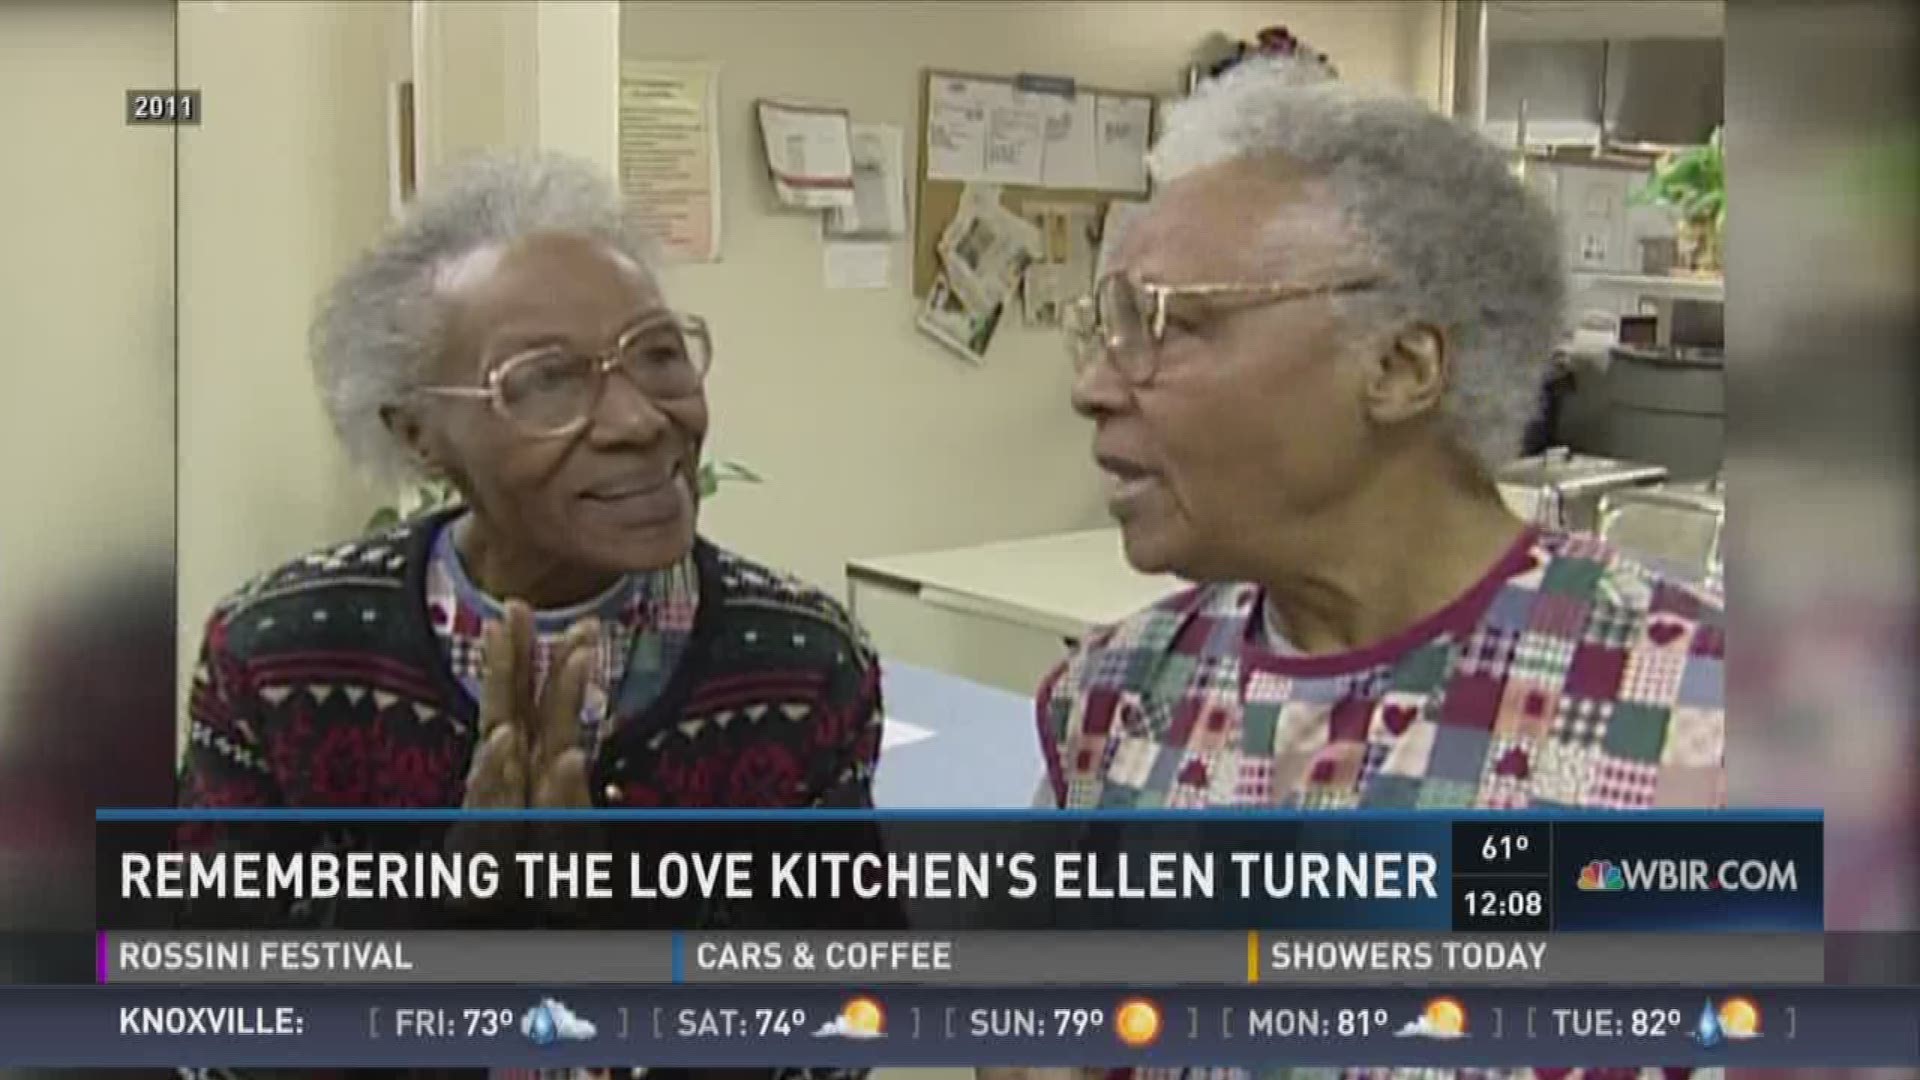 Ellen Turner, the co-founder of the Love Kitchen, died on April 22, 2015. She's being remembered today for her devotion to the community.